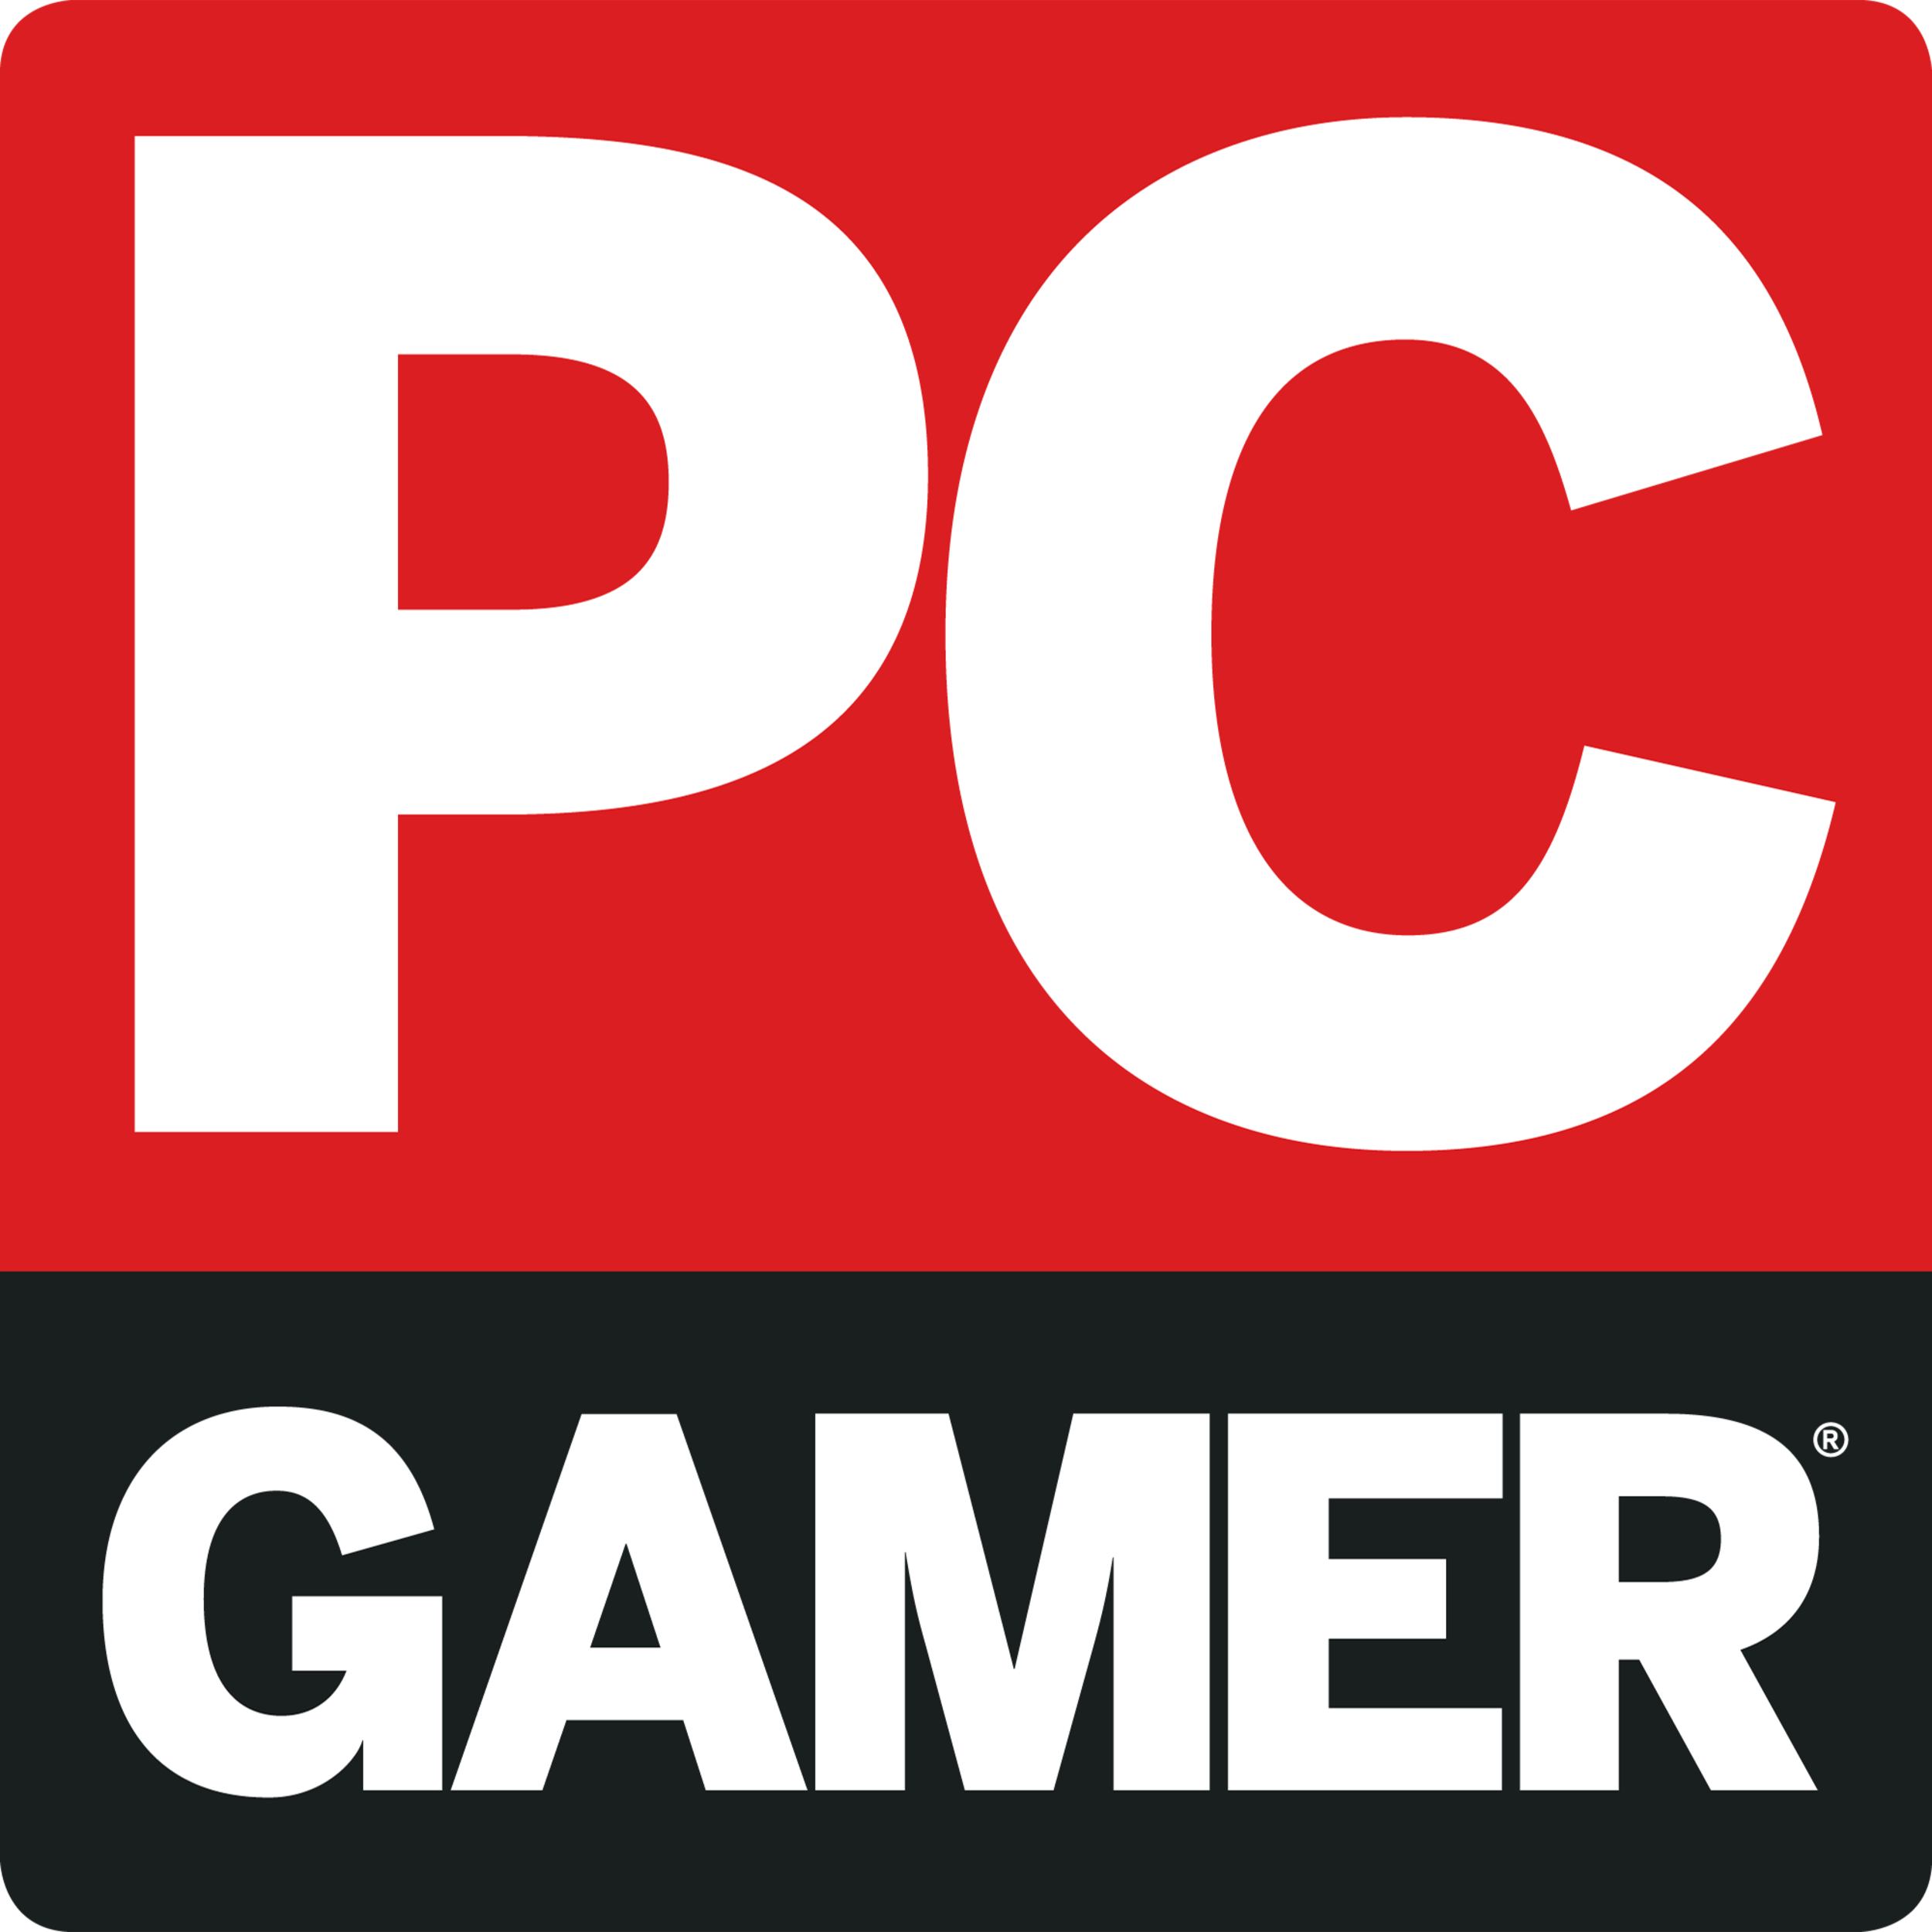 PC Gamer's Game of the Year Awards 2021